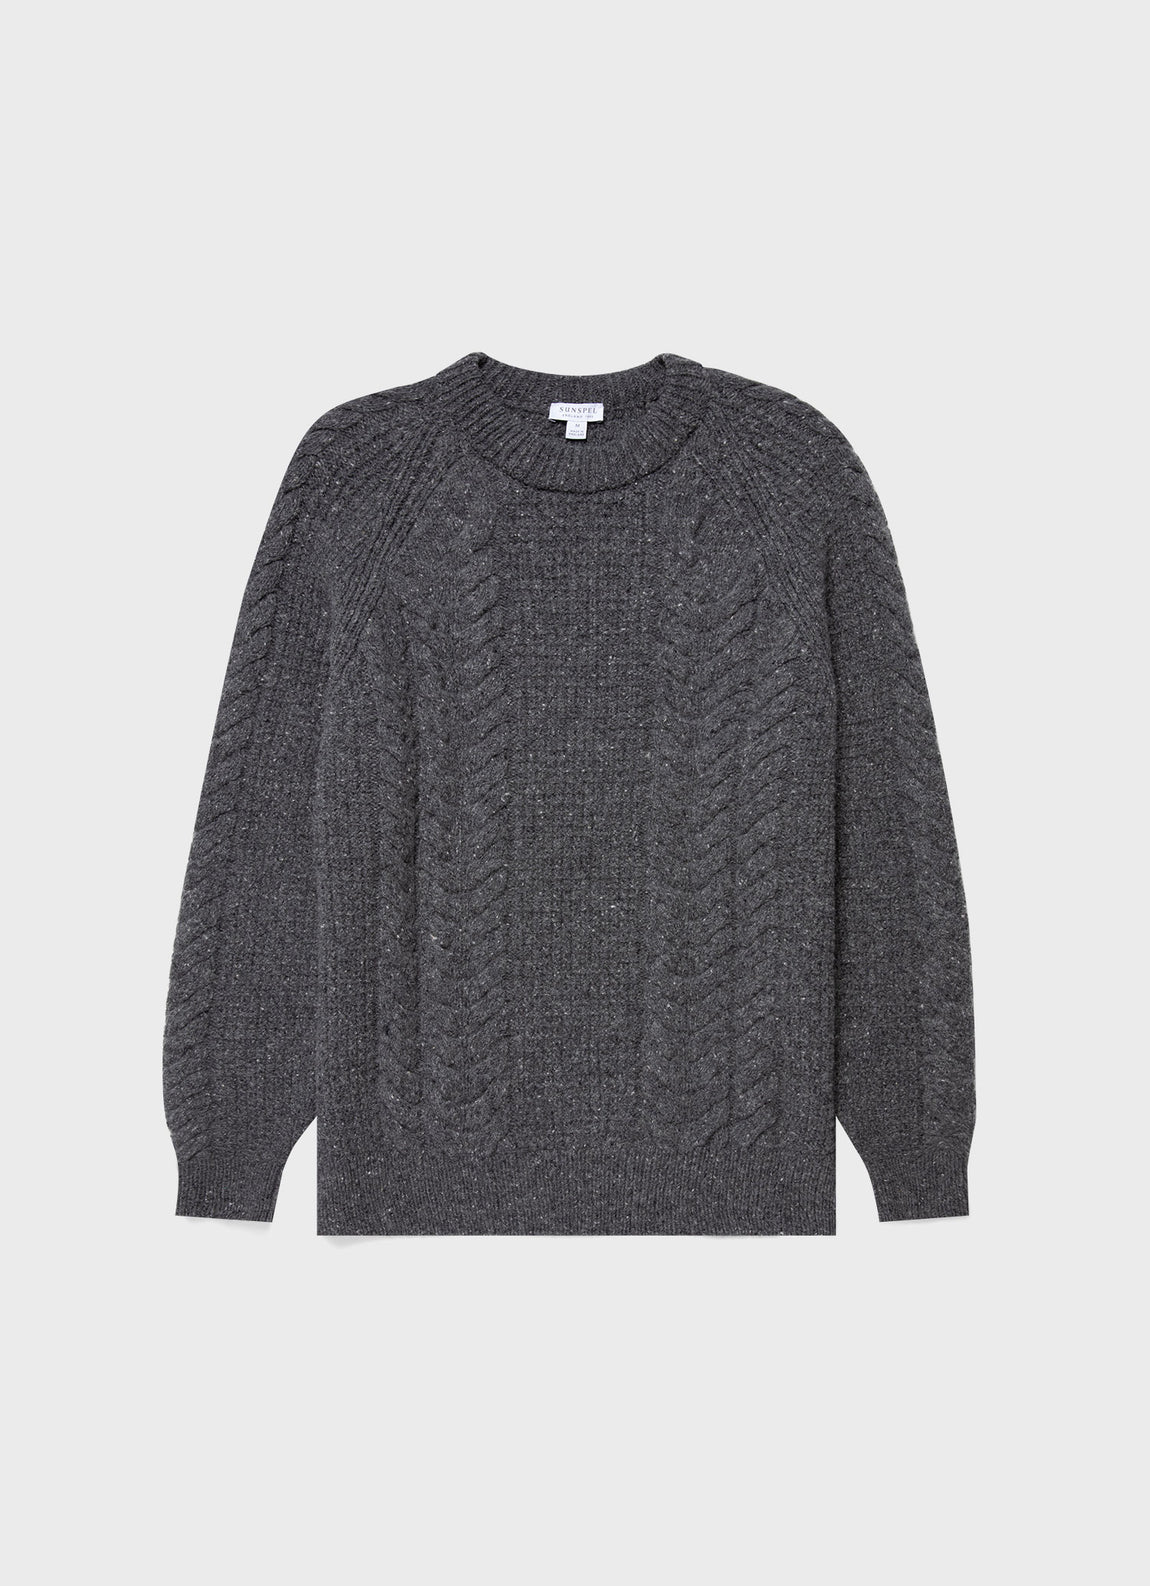 Men's Textured Donegal Jumper in Mid Grey Donegal